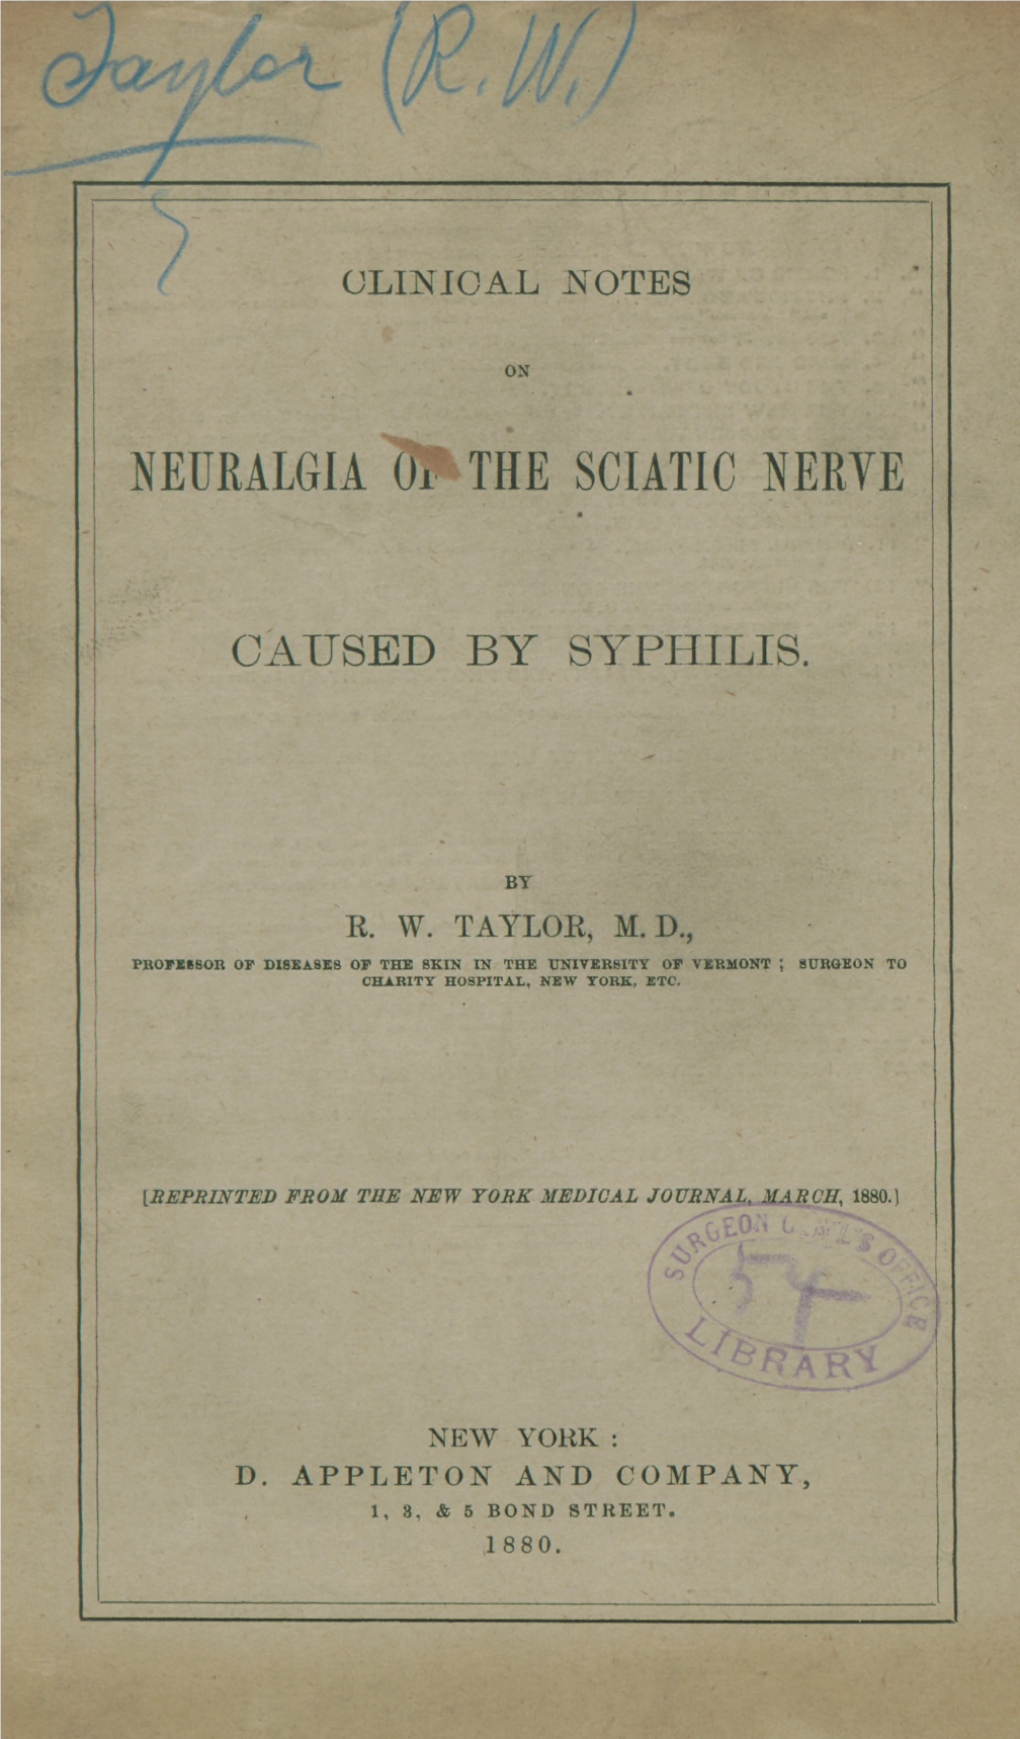 Clinical Notes on Neuralgia of the Sciatic Nerve Caused by Syphilis